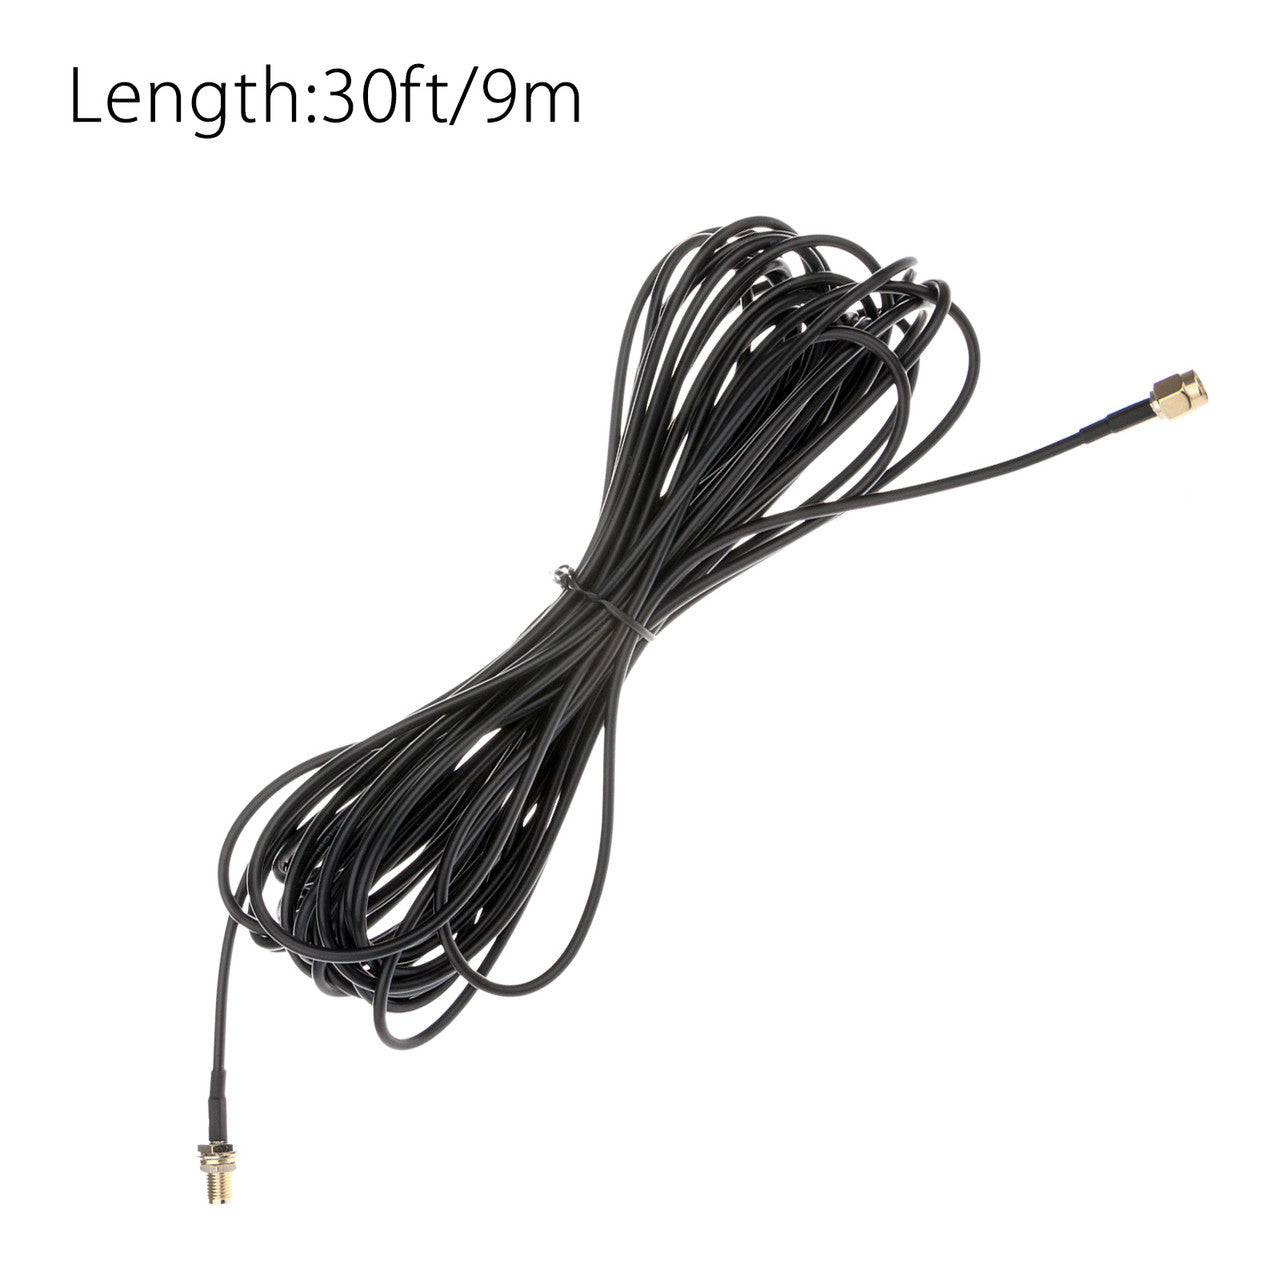 30ft WiFi Antenna SMA Extension Coaxial Cable Cord for Wi-Fi Wireless Router Antenna SMA Male to Female Coax Adapter Connector